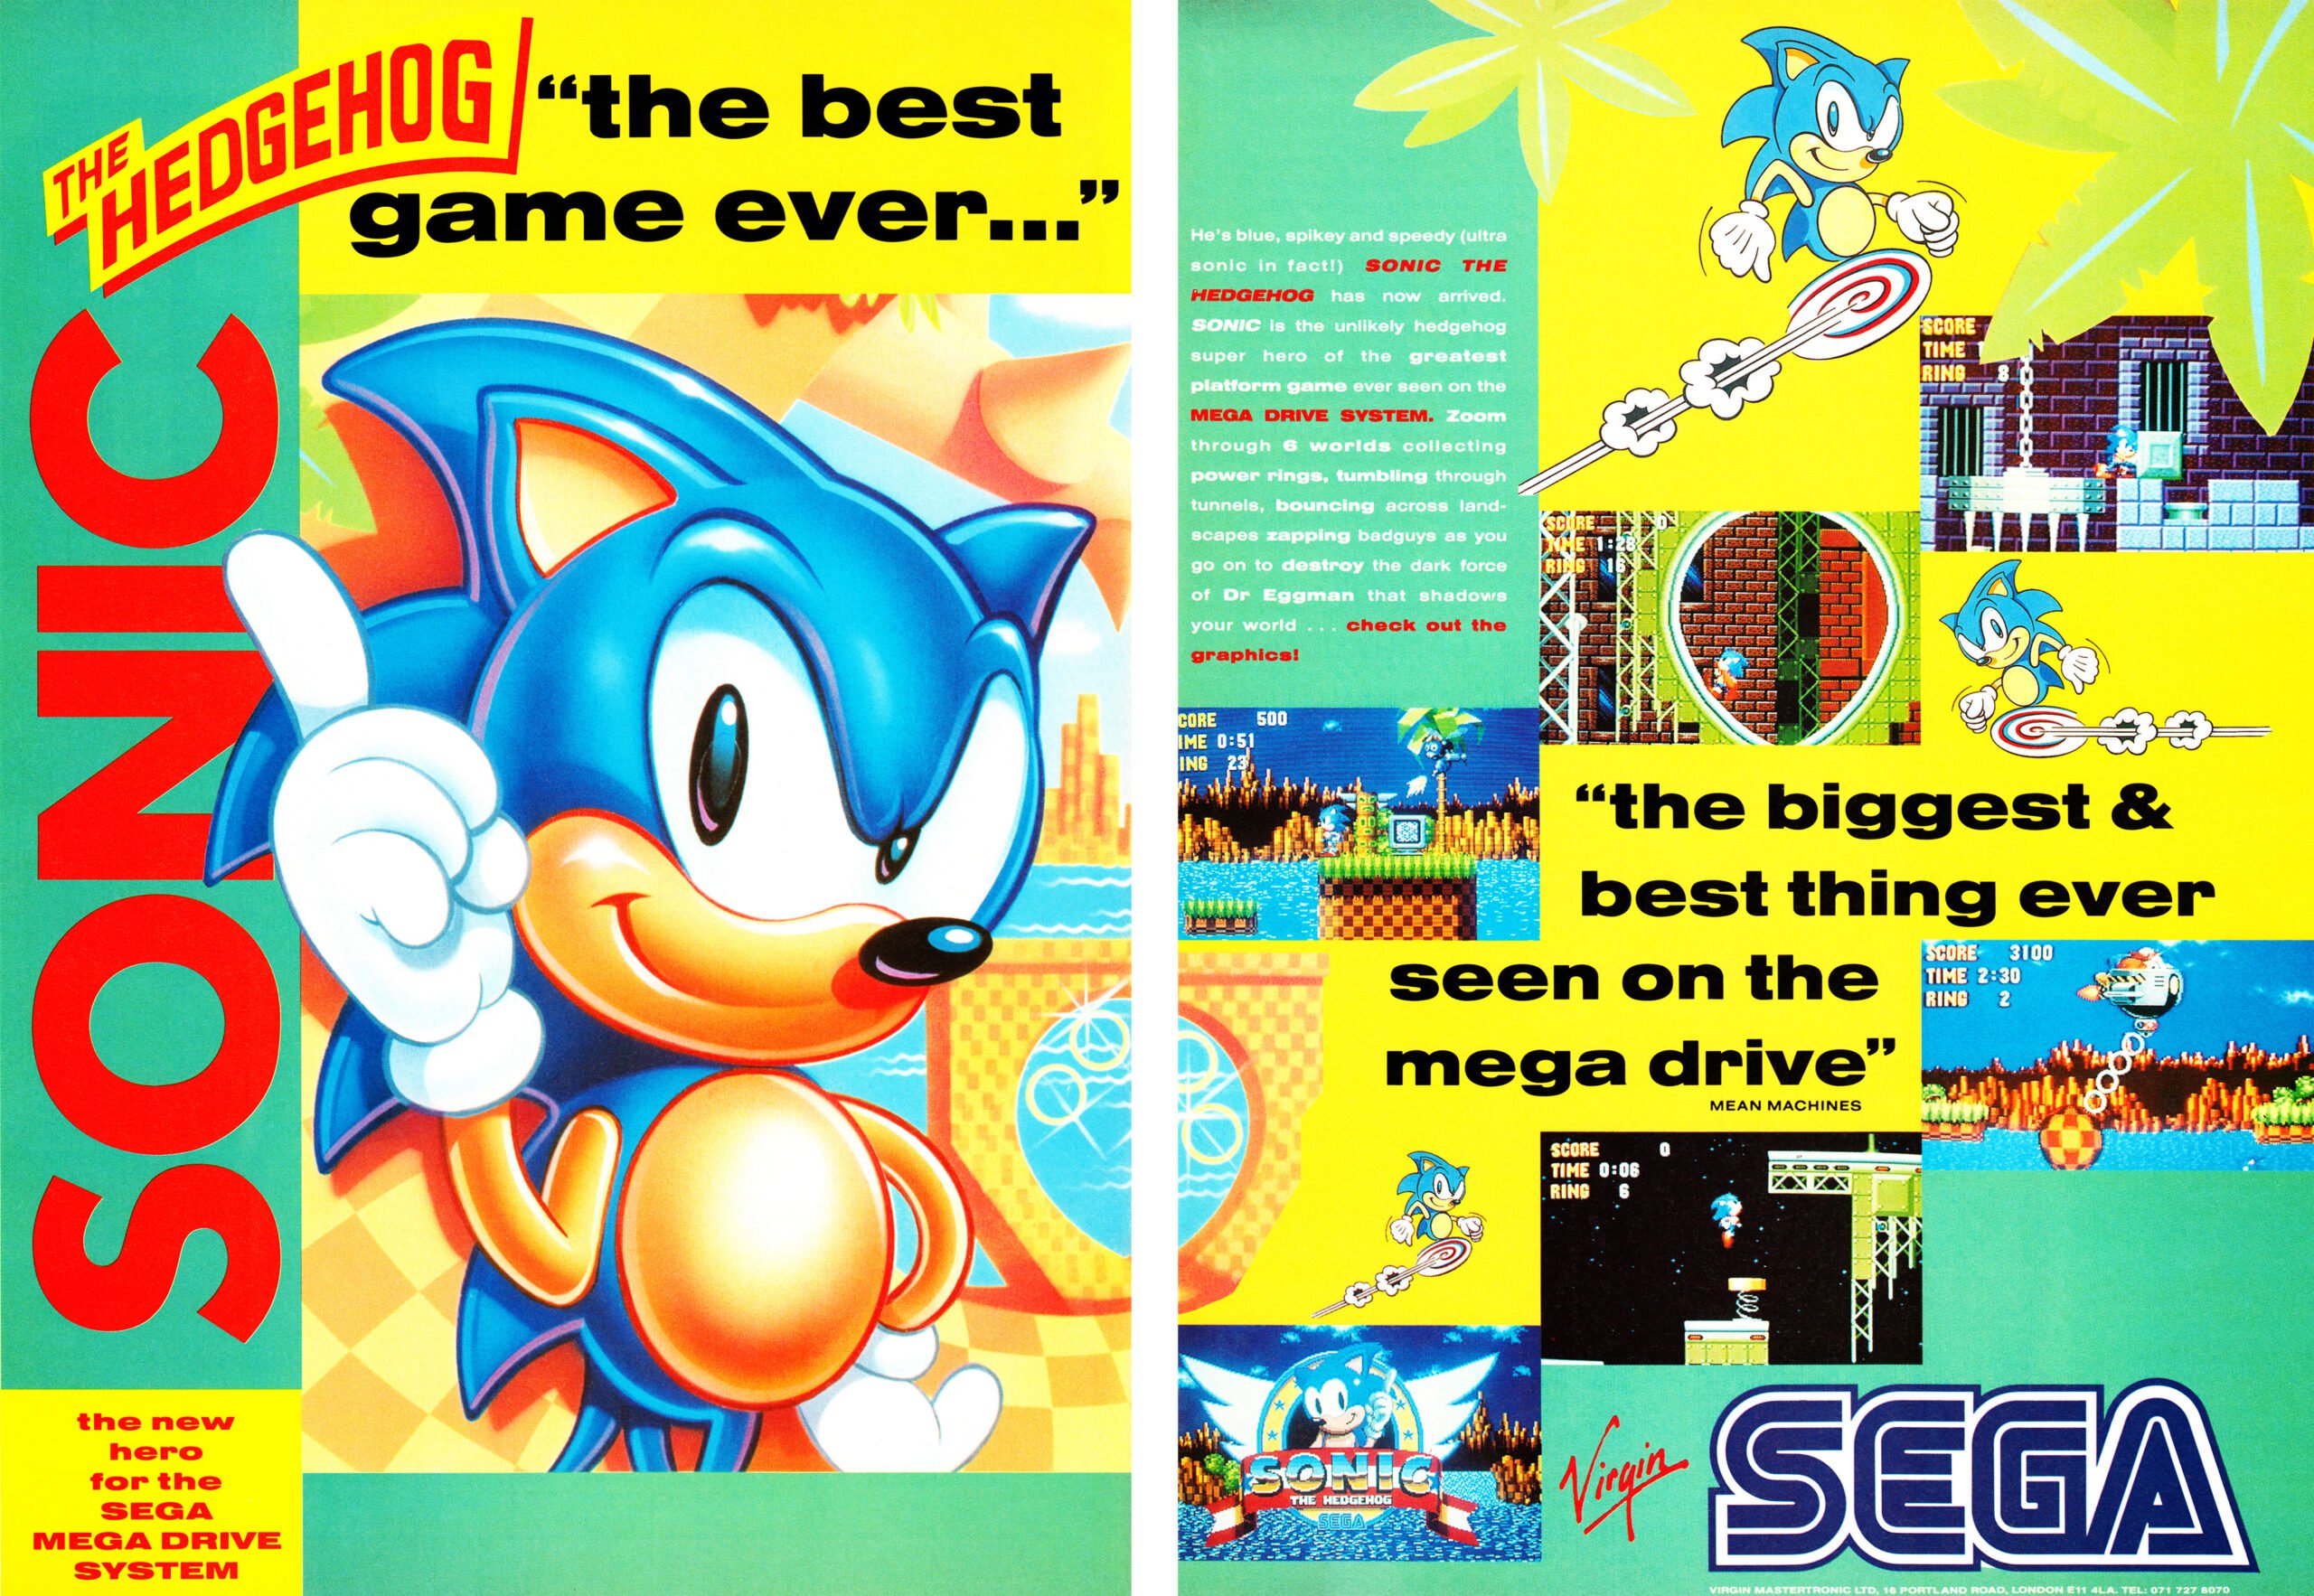 Sonic the Hedgehog is 30 years old today